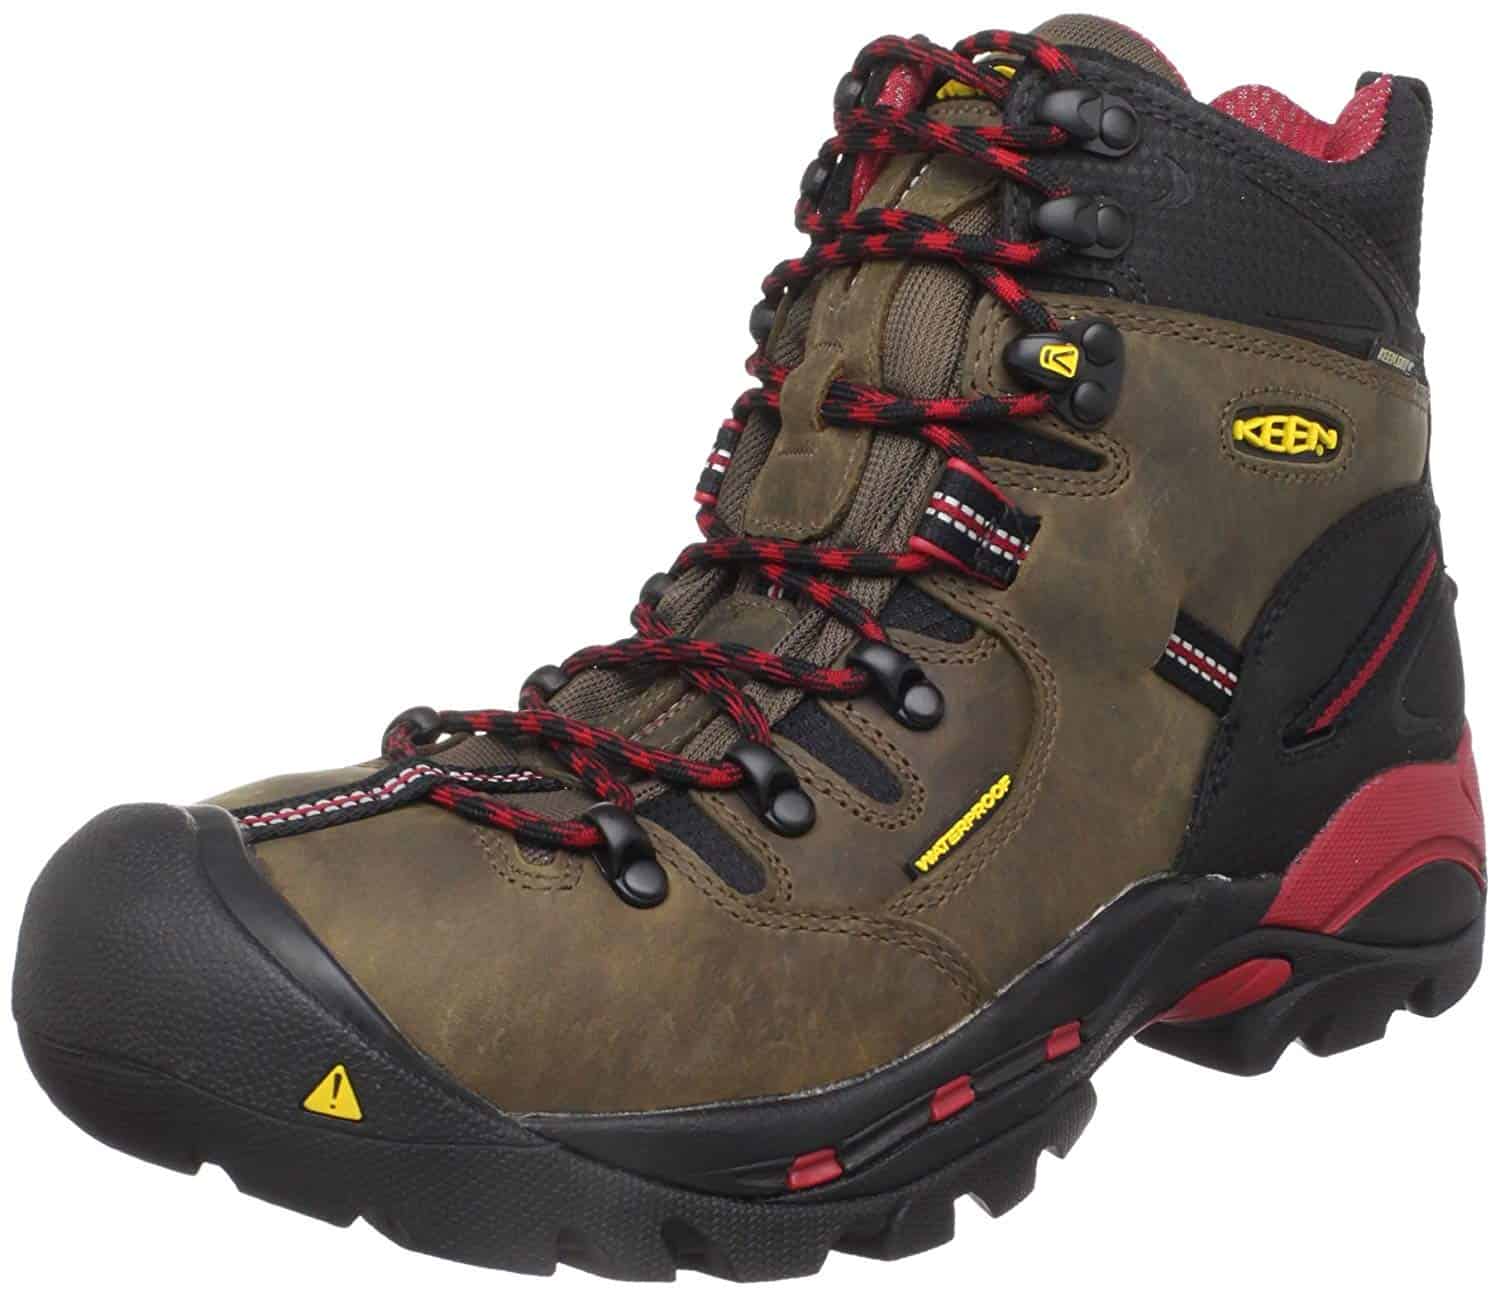 Most Comfortable Work Boots 2020 – My 